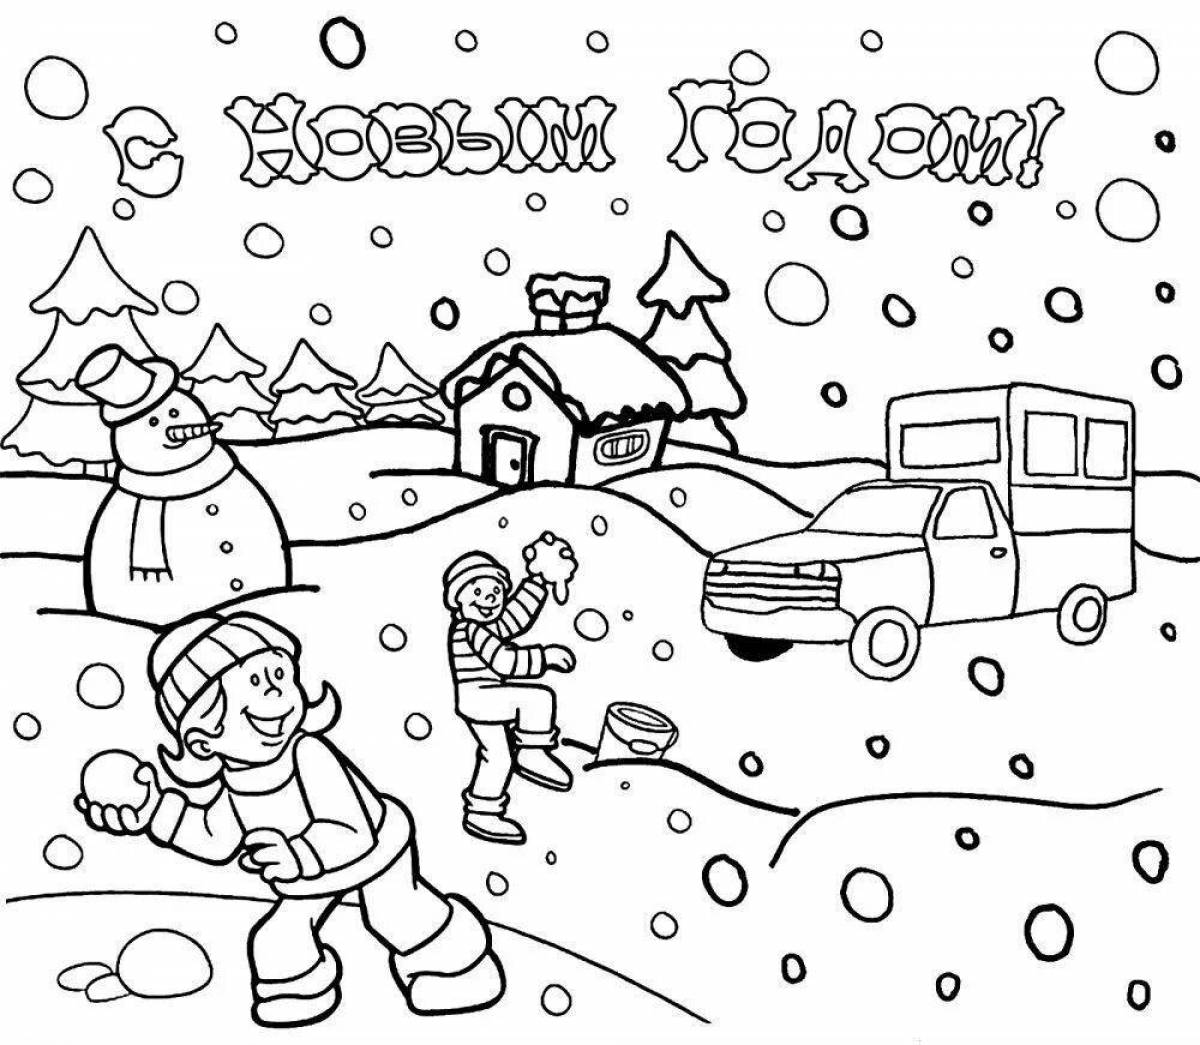 Sparkling winter Christmas coloring book